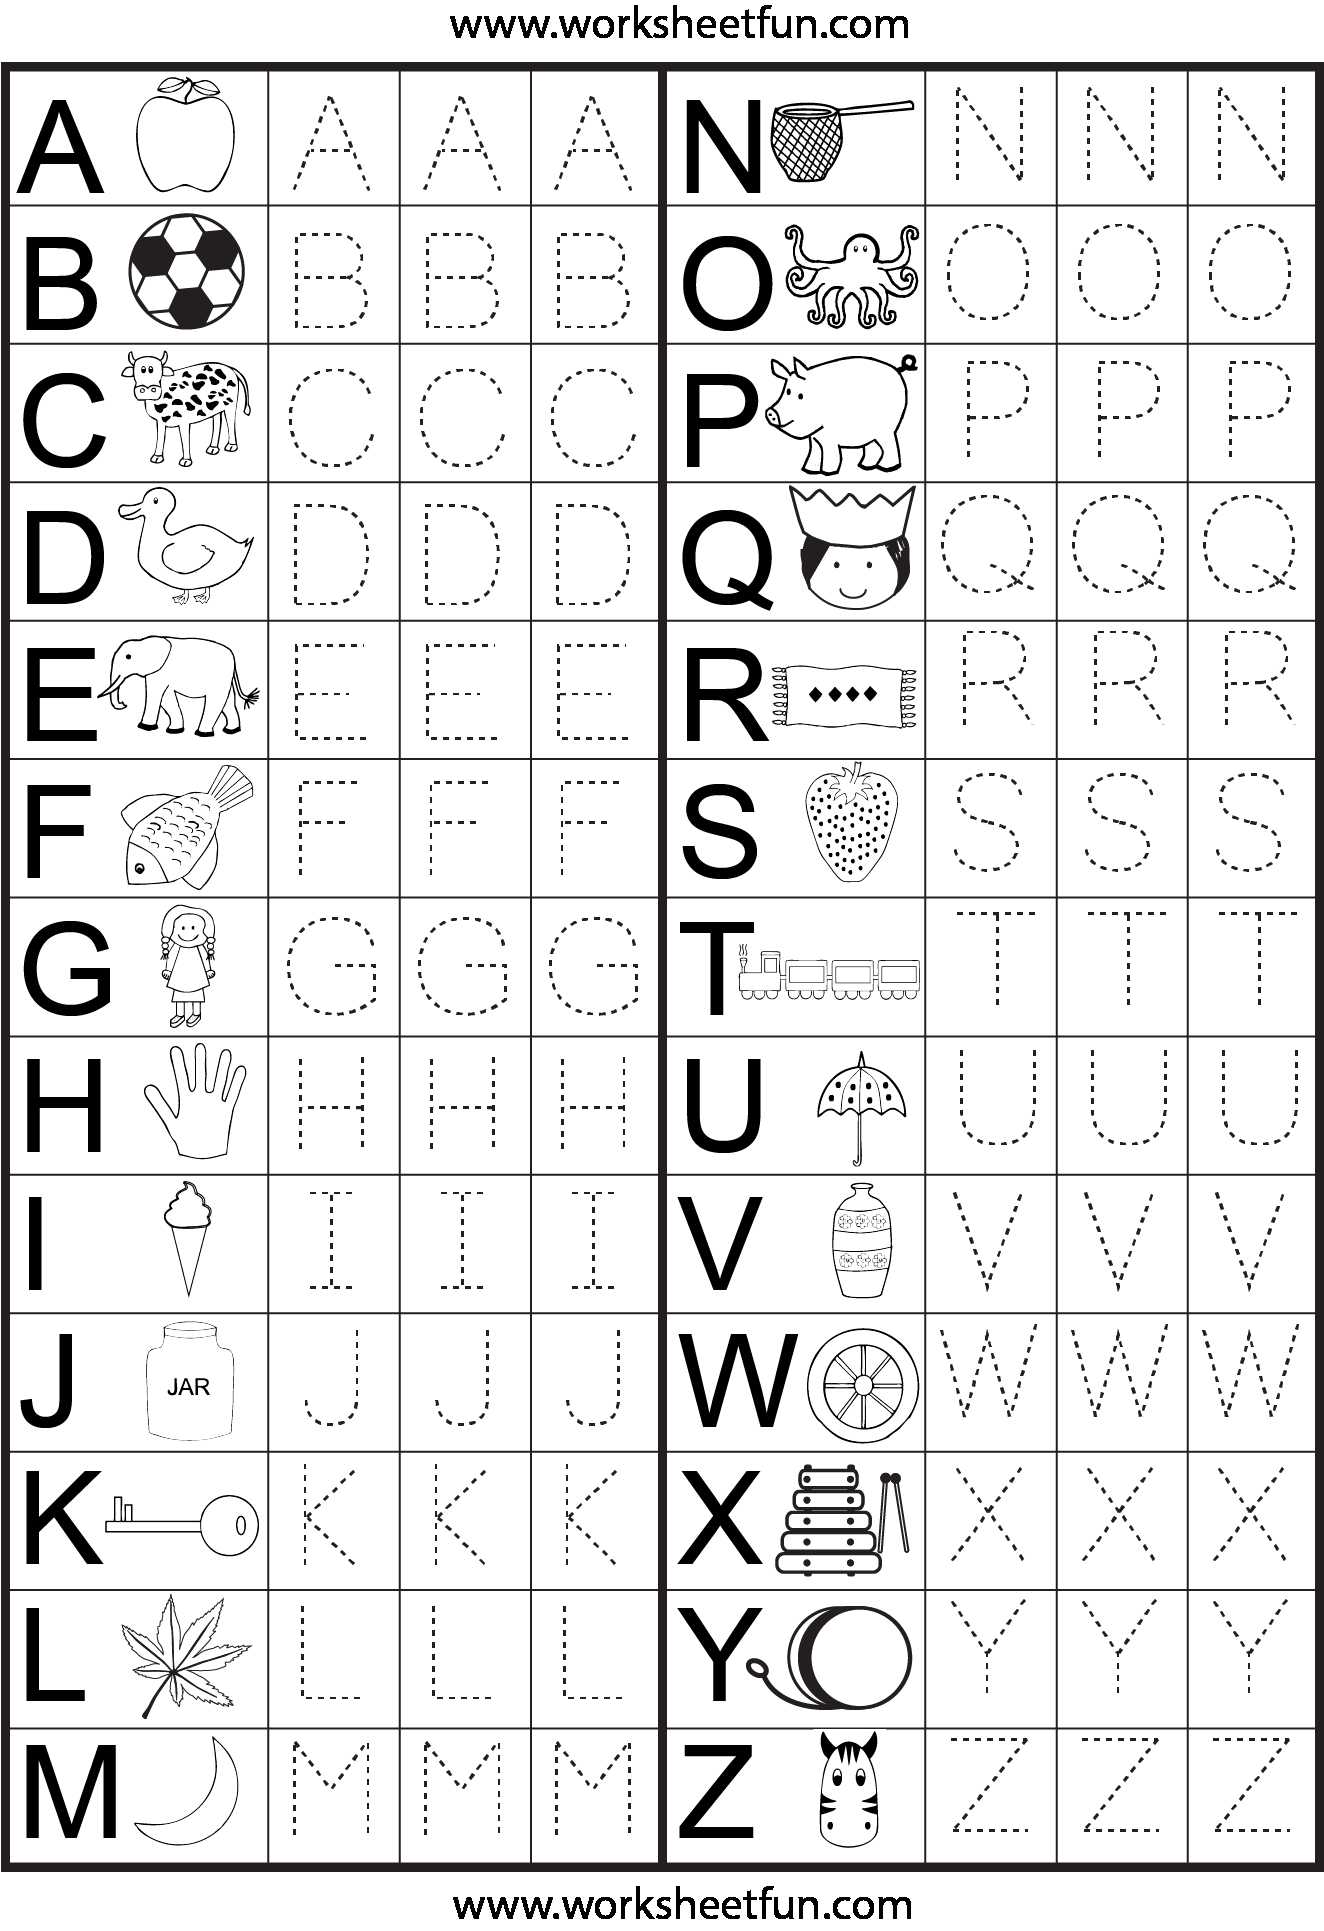 Pre K Shapes Worksheets or I Just Printed Off 13 Worksheets From This Website